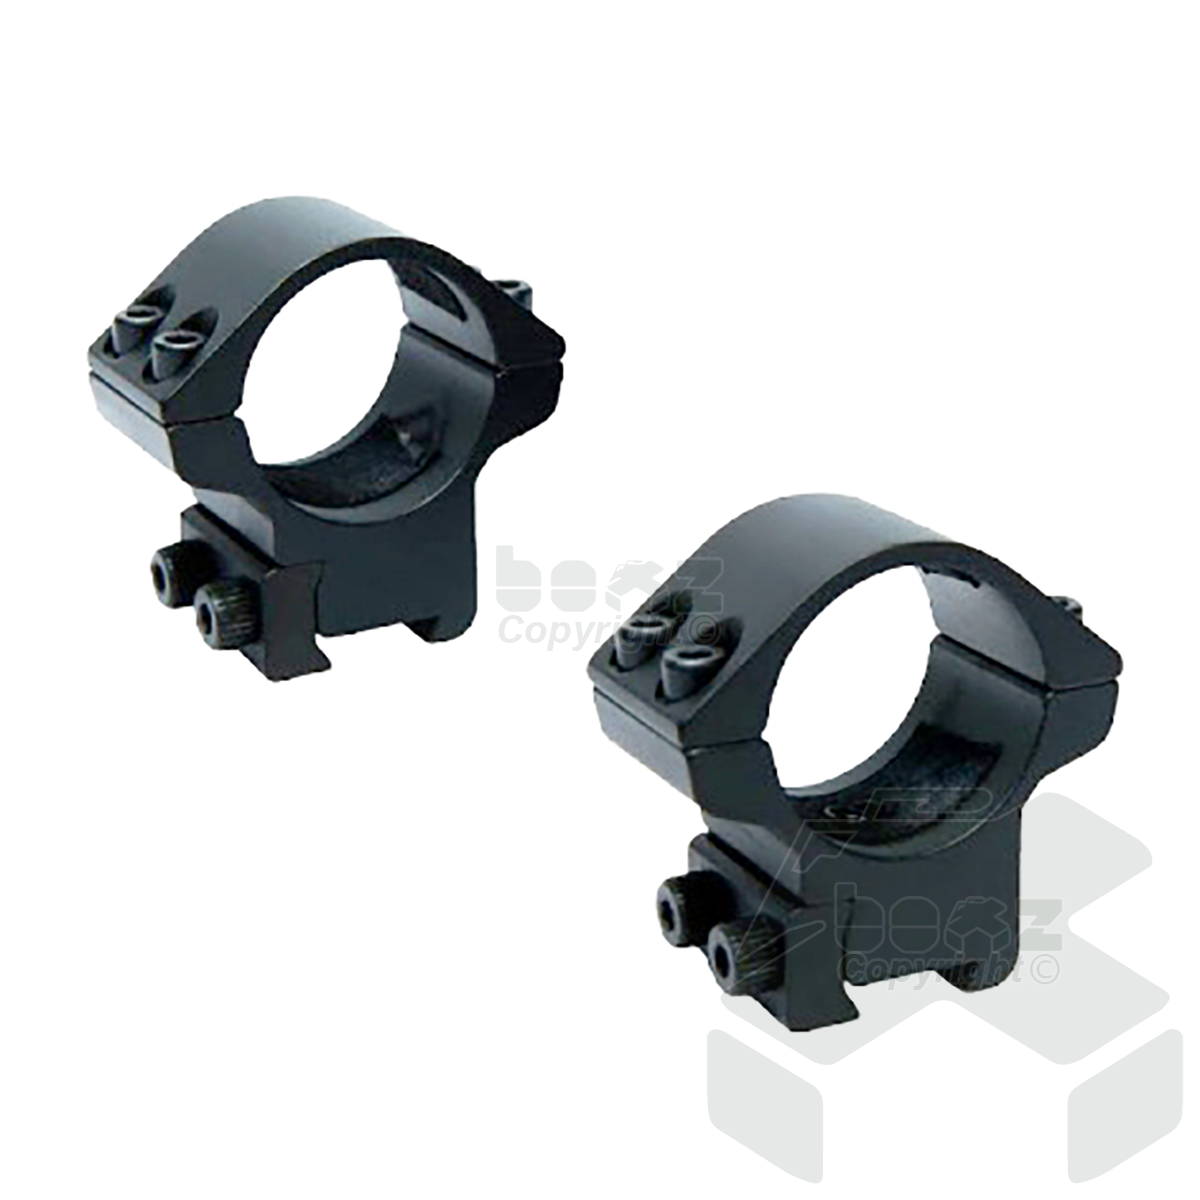 Proshot Two-Piece 1" Scope Mounts Low - Dovetail